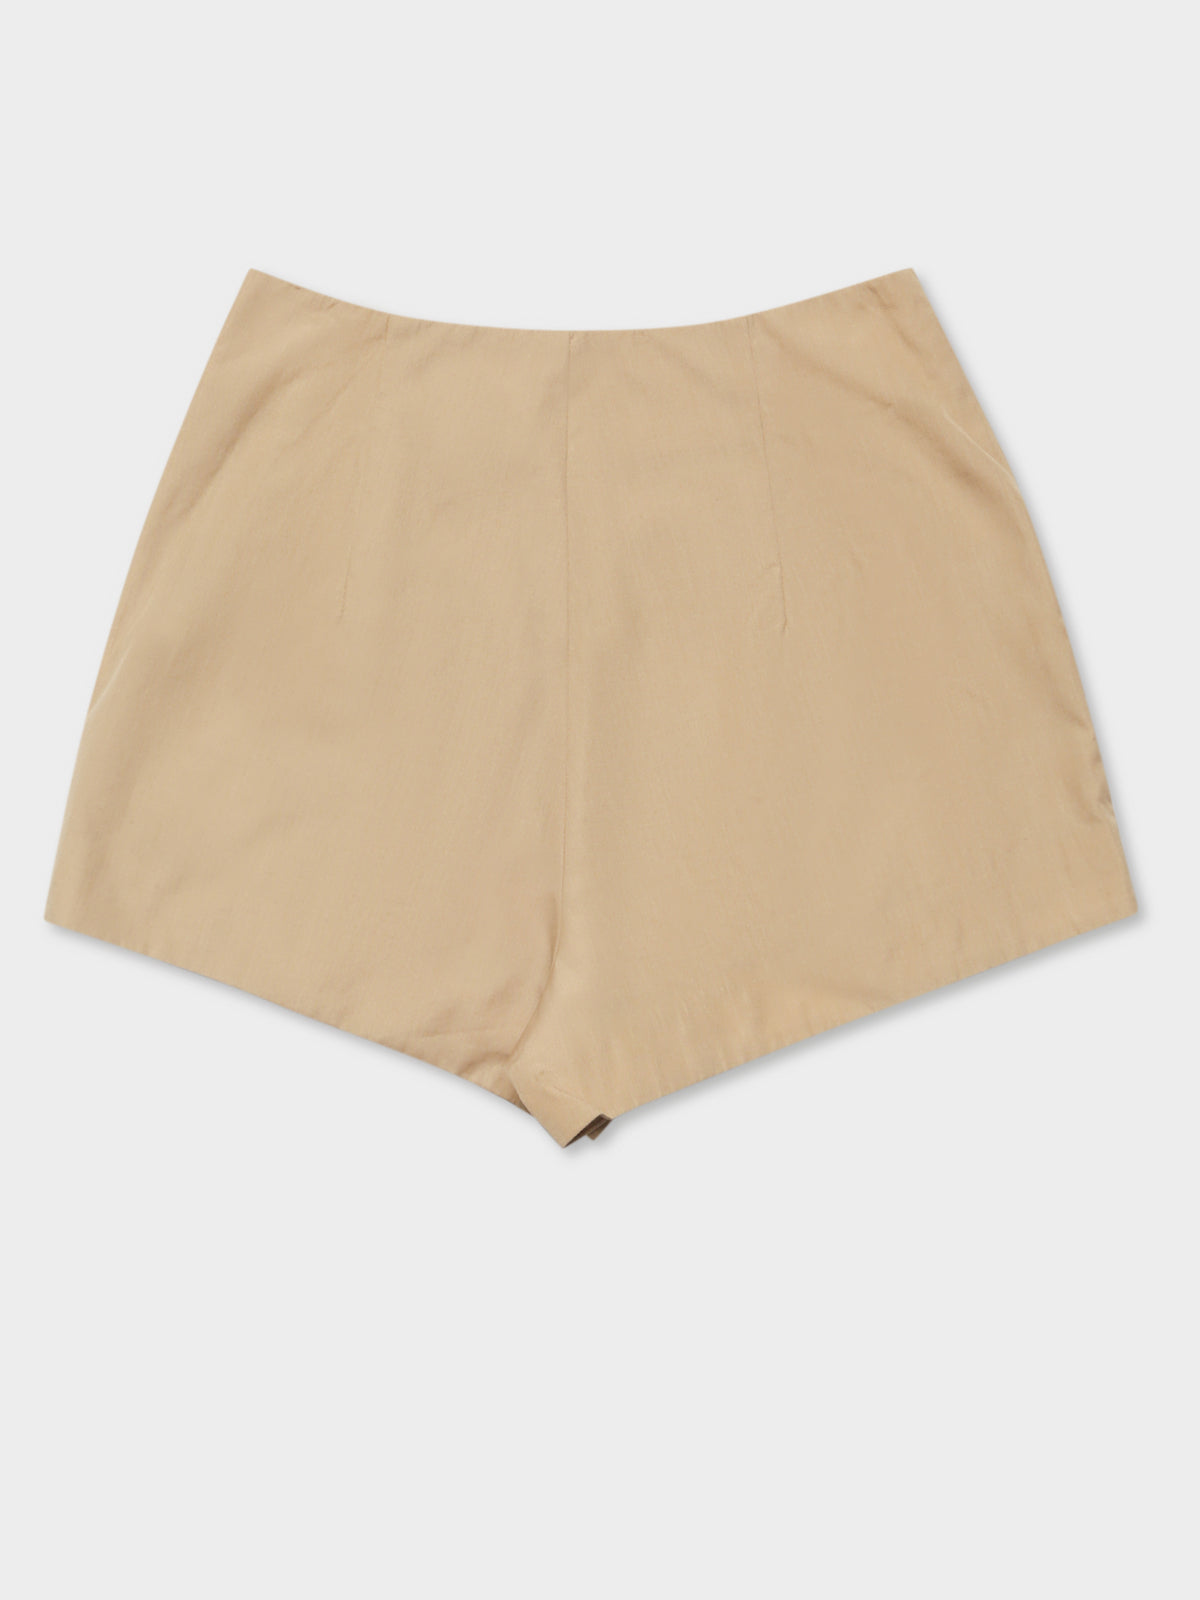 Caleb Shortie in Taupe